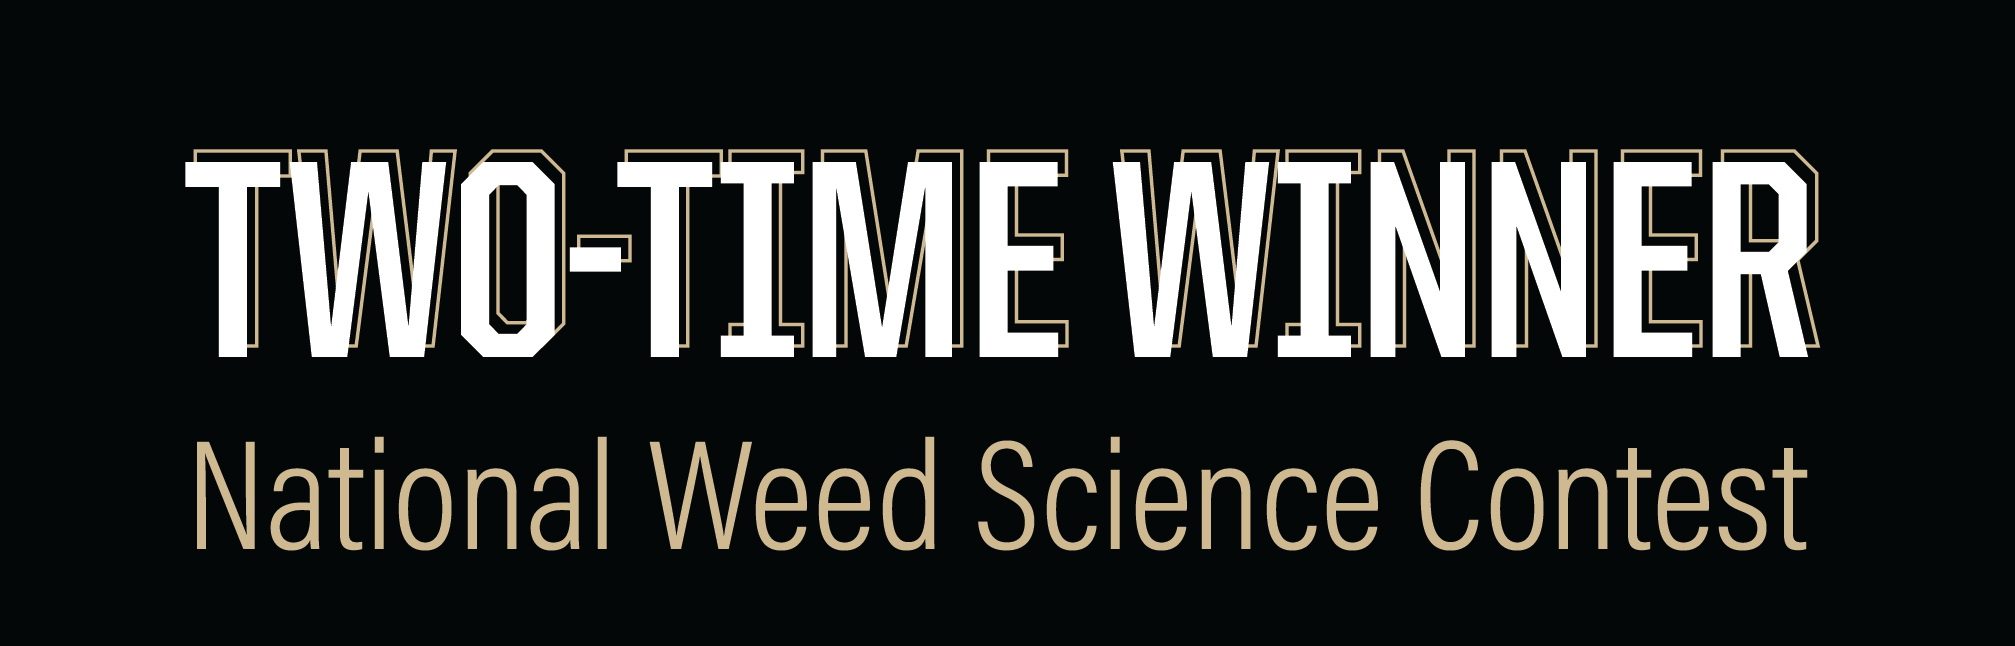 Infographic: Two-time winner national weed science contest